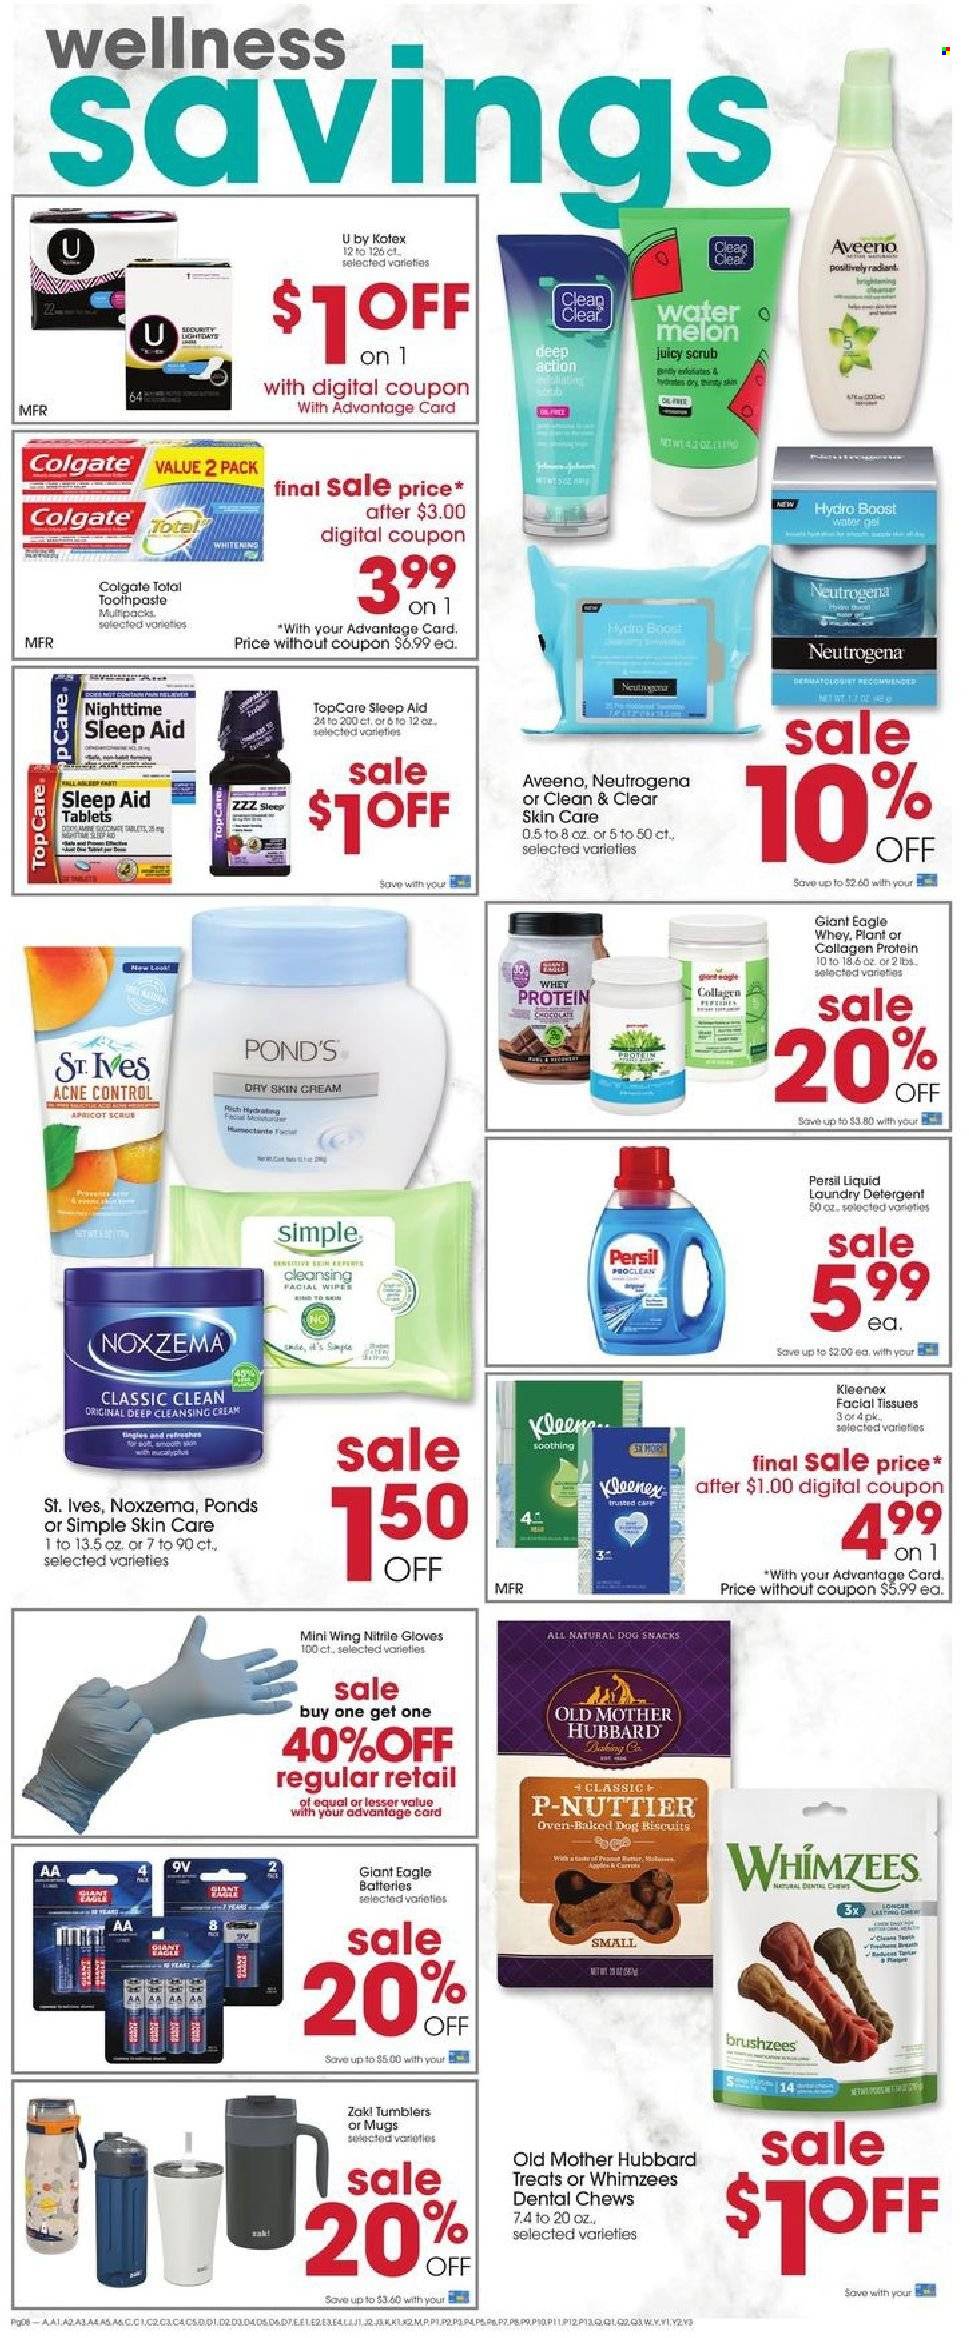 thumbnail - Giant Eagle Flyer - 09/16/2021 - 09/22/2021 - Sales products - carp, snack, chewing gum, Boost, Aveeno, Kleenex, tissues, detergent, Persil, POND'S, Colgate, Kotex, facial tissues, Neutrogena, Clean & Clear, gloves, tumbler, battery, dental chews, Whimzees, whey protein, melons. Page 7.